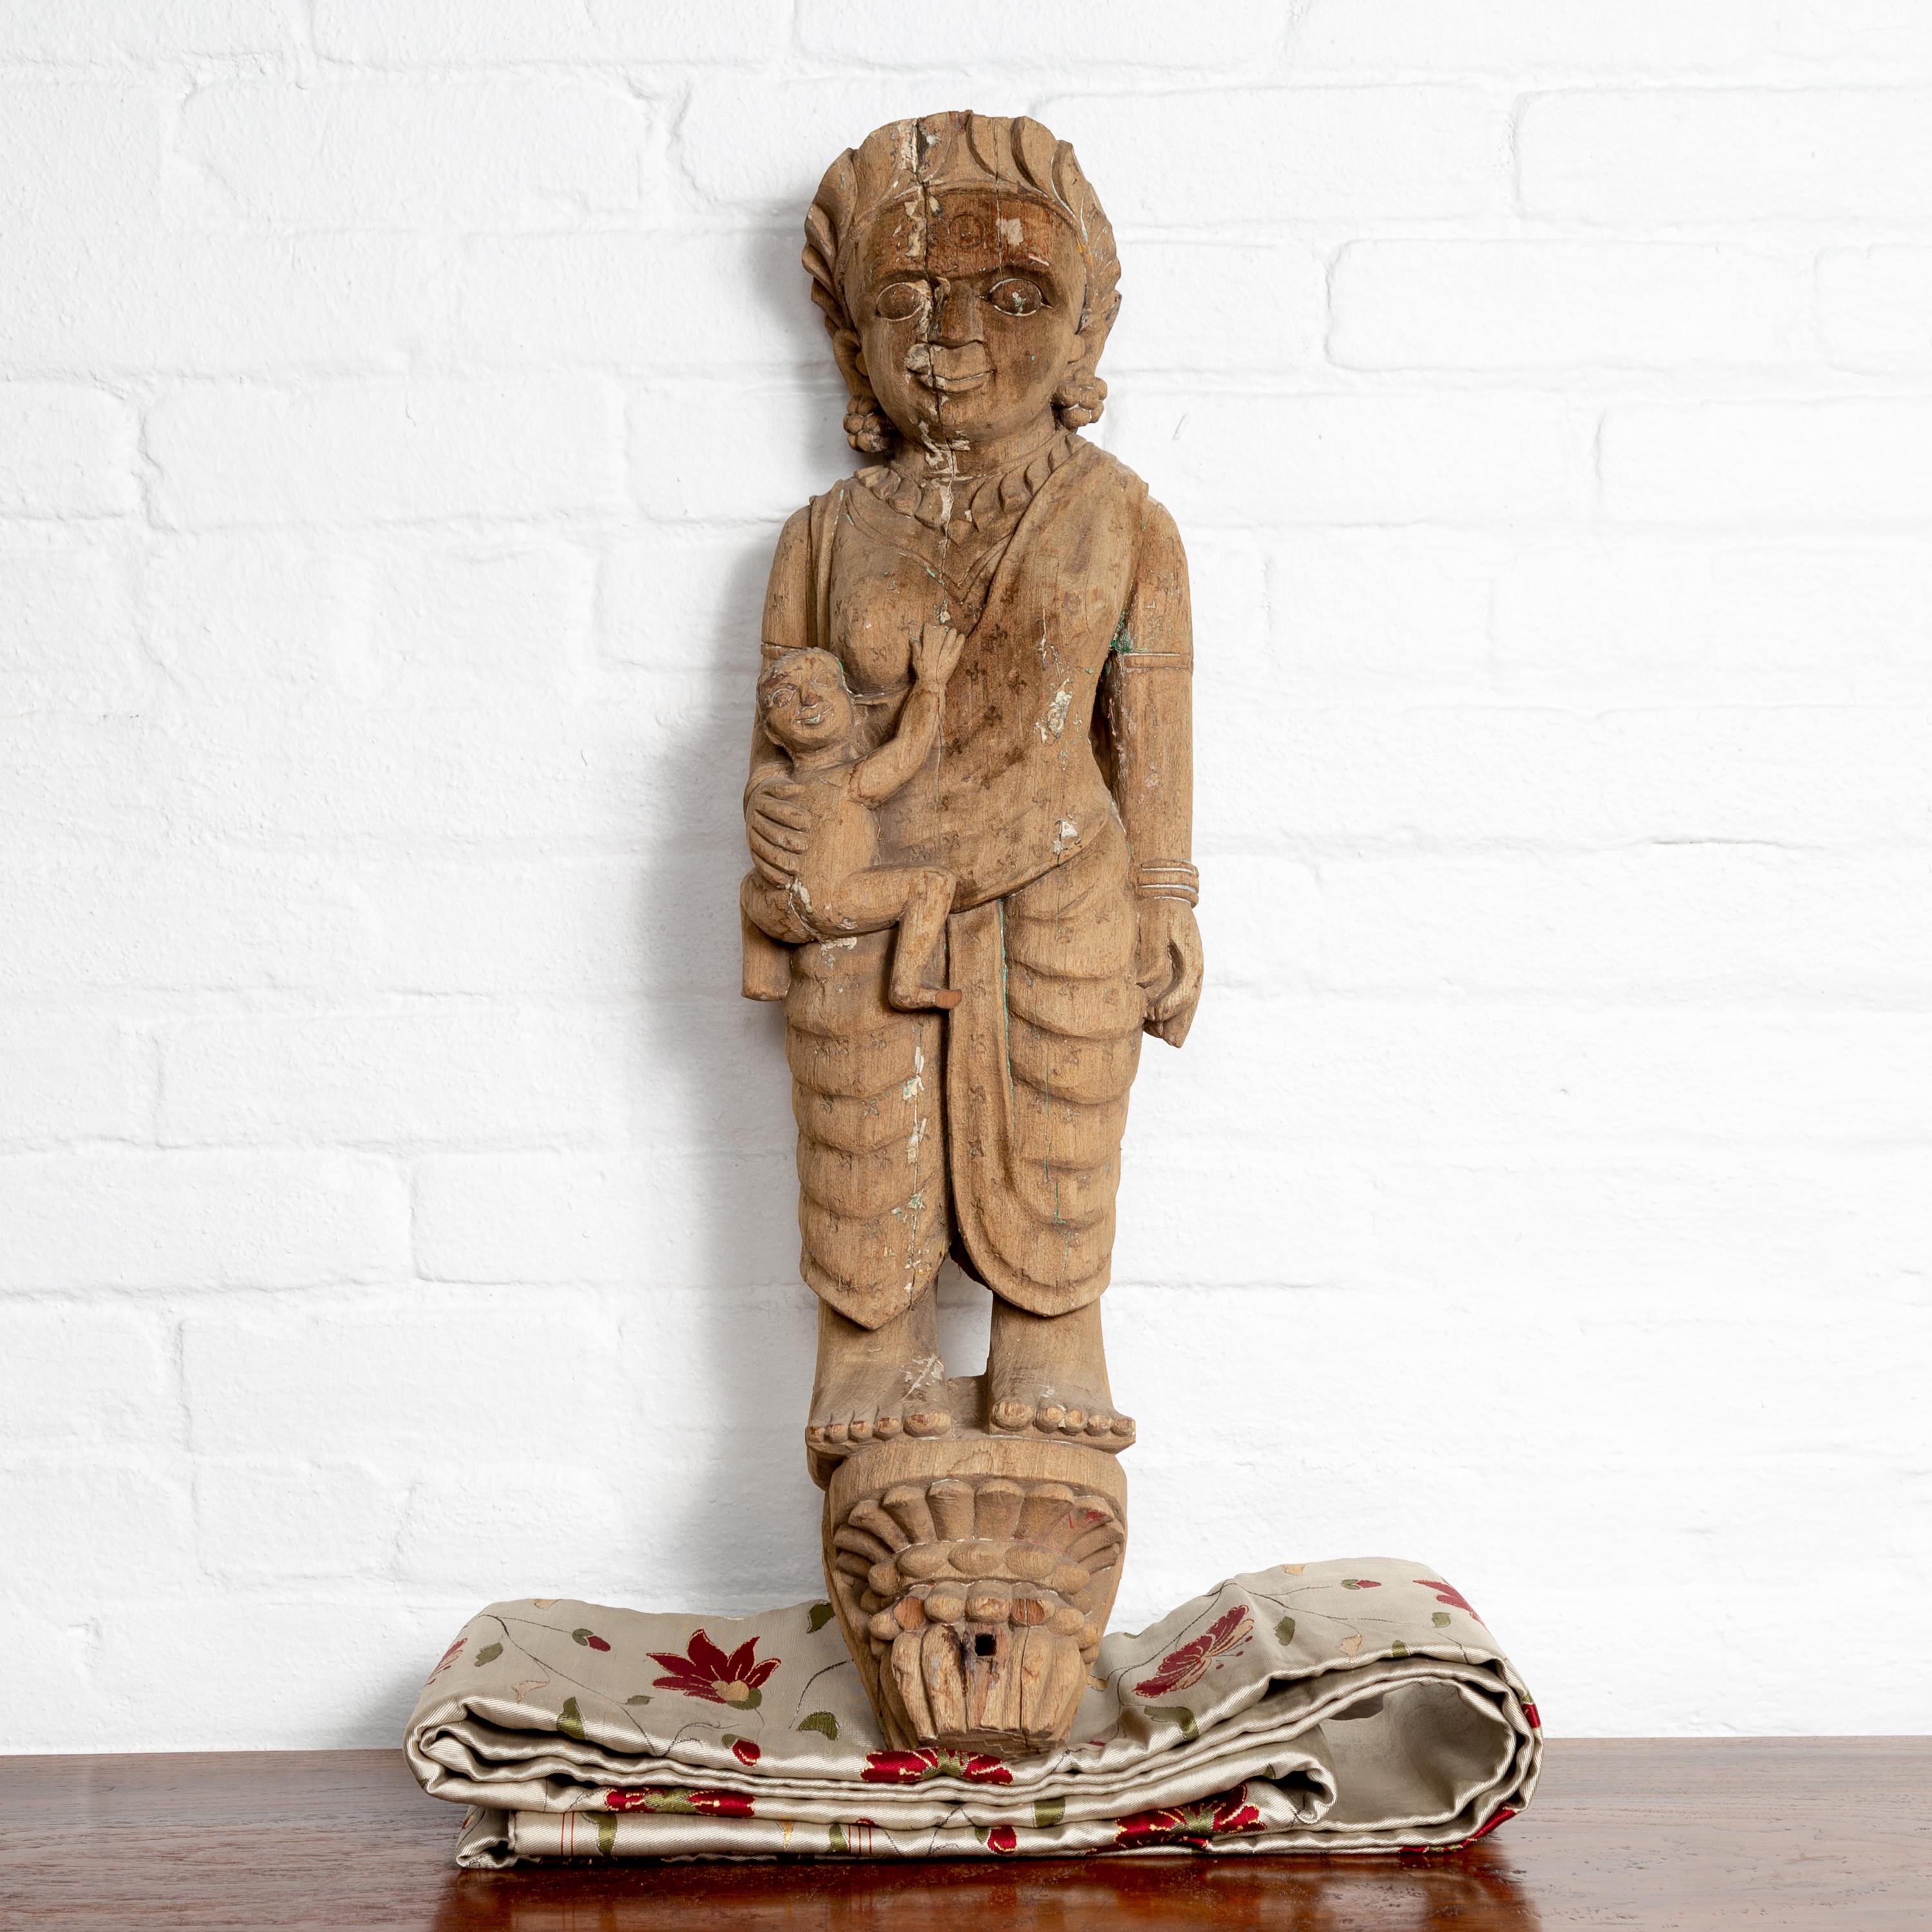 An Indian early 20th century hand carved architectural temple carving from Gujarat, depicting a mother and her child with nicely weathered patina. Born in the Western portion of India in the state of Gujarat, this exquisite hand carved temple